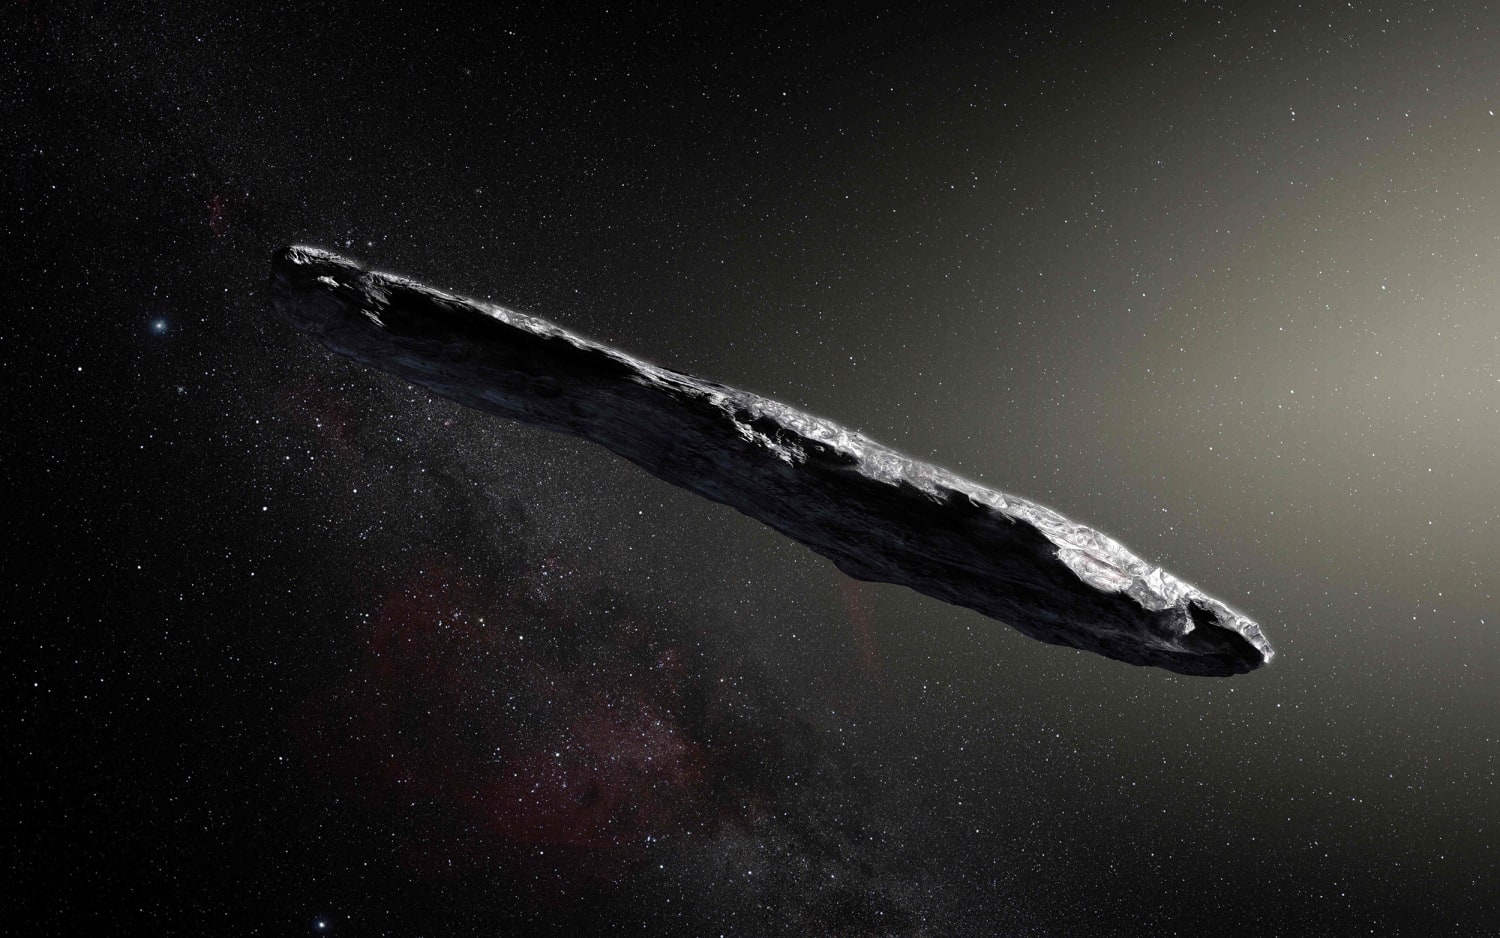 Scientists Say Mysterious Oumuamua Object Could Be An Alien Spacecraft